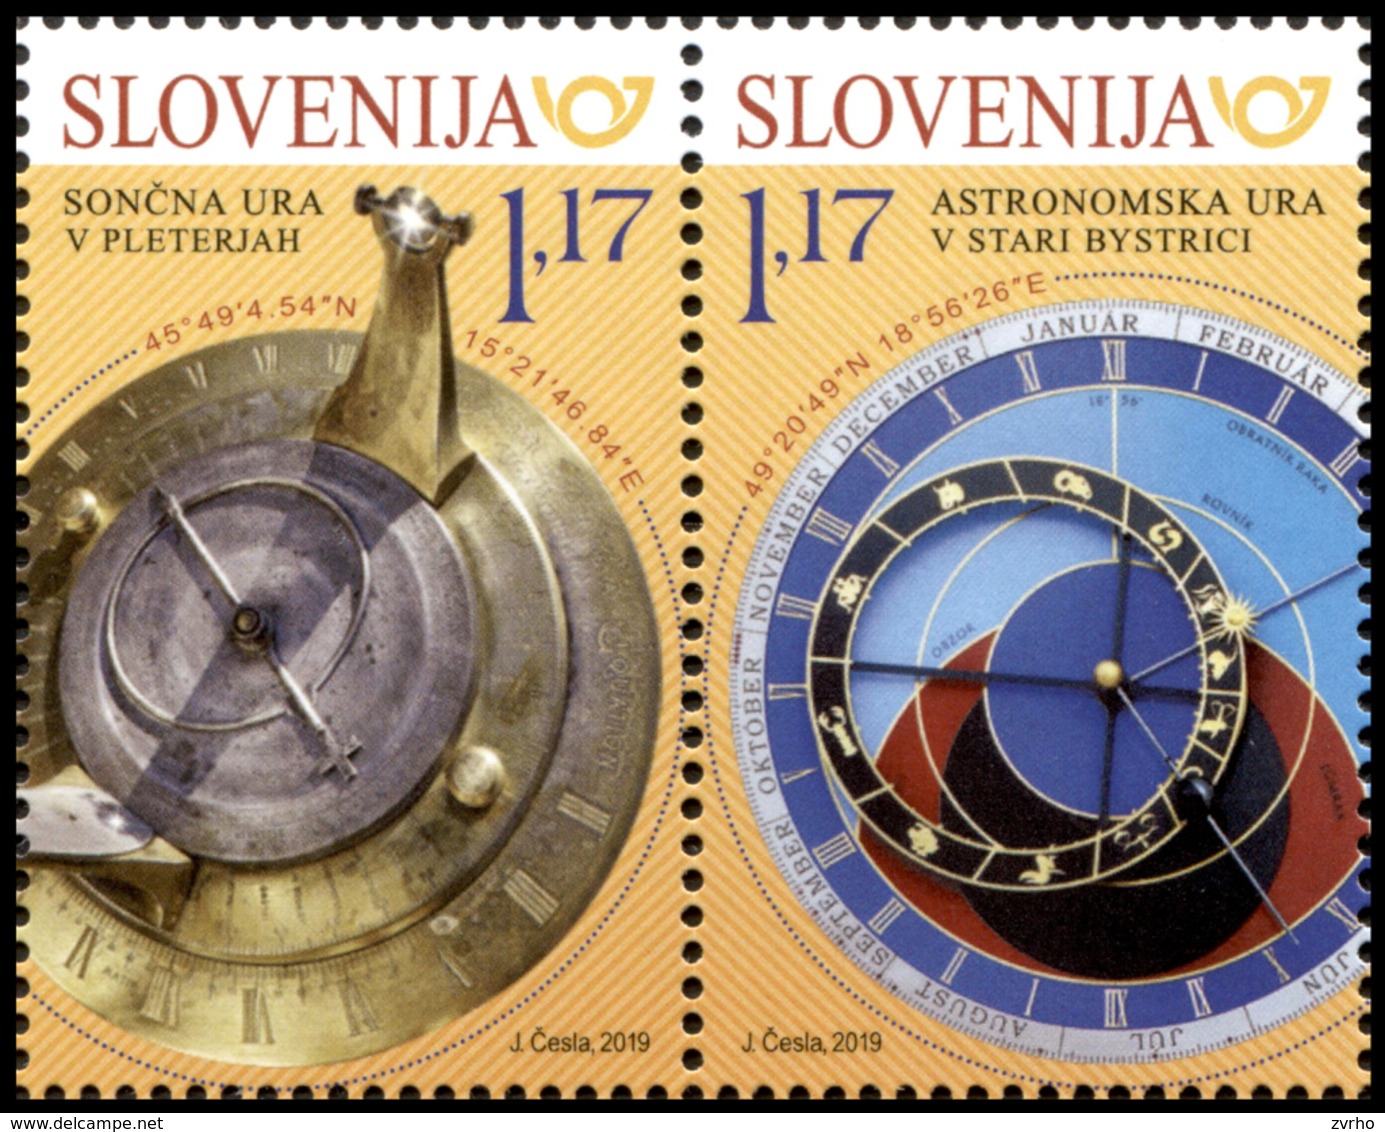 SLOVENIA SLOWENIEN 2019 SUNDIAL ASTRONOMICAL CLOCK ASTRONOMISCHE UHR ** JOINT ISSUES** SET ** MNH - Astronomy